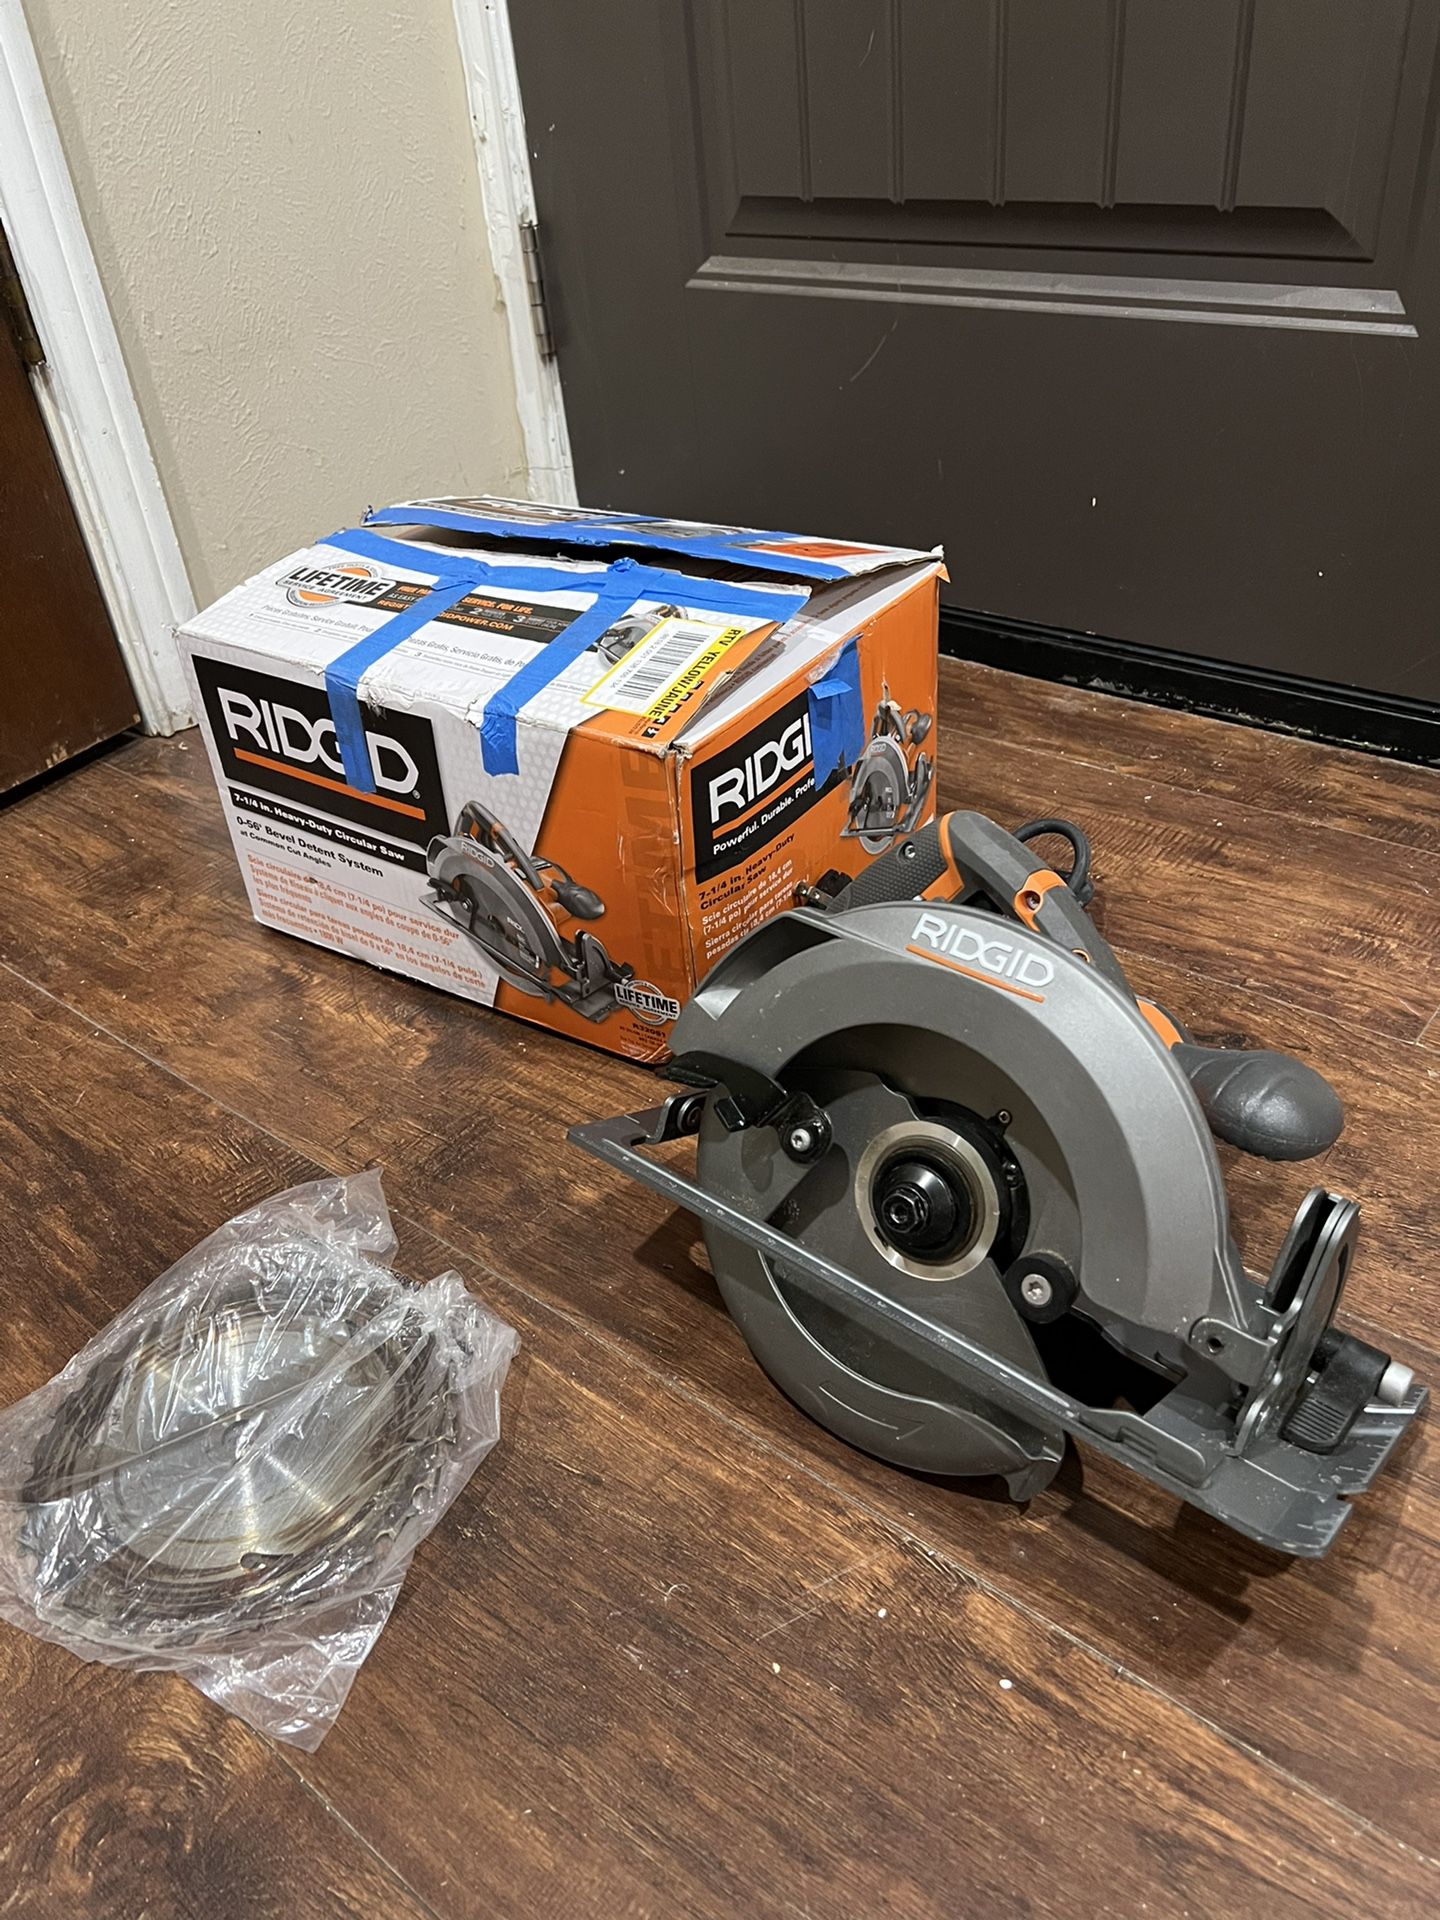 RIDGID 15 Amp 7-1/4 in. Circular Saw for Sale in Duncanville, TX OfferUp